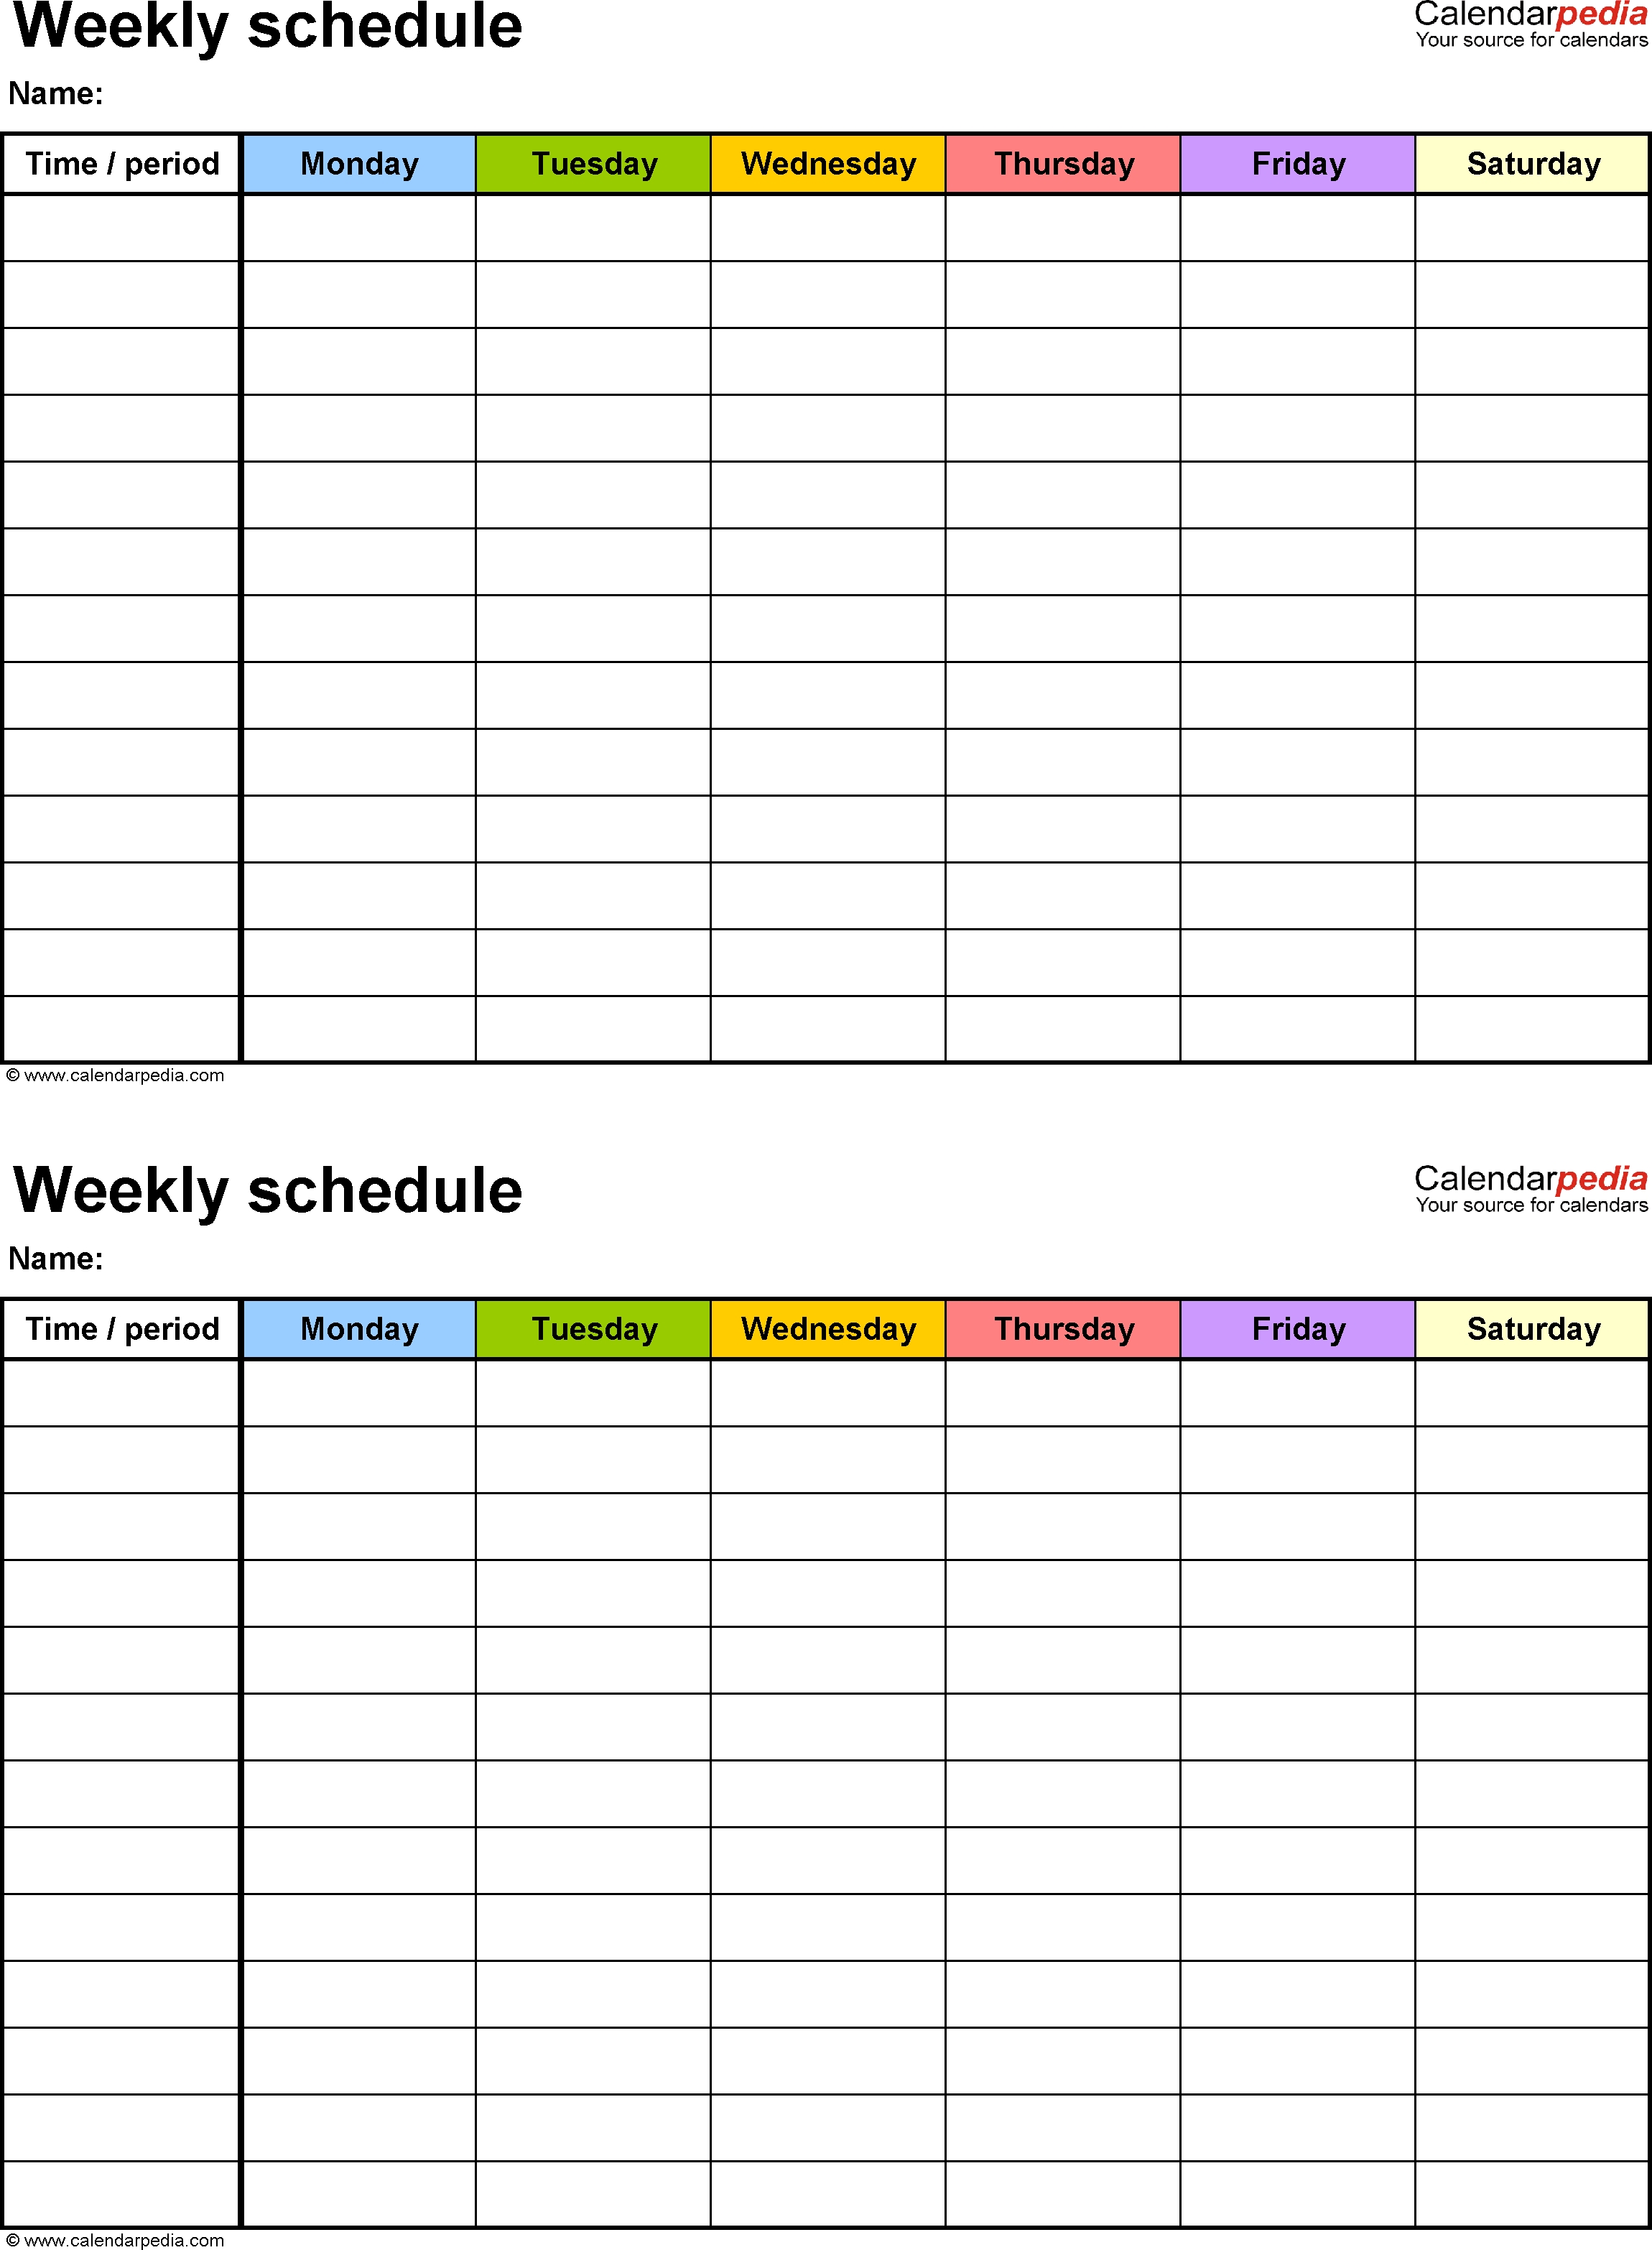 Free Weekly Schedule Templates For Word - 18 Templates-2 Week Schedule Template Printable